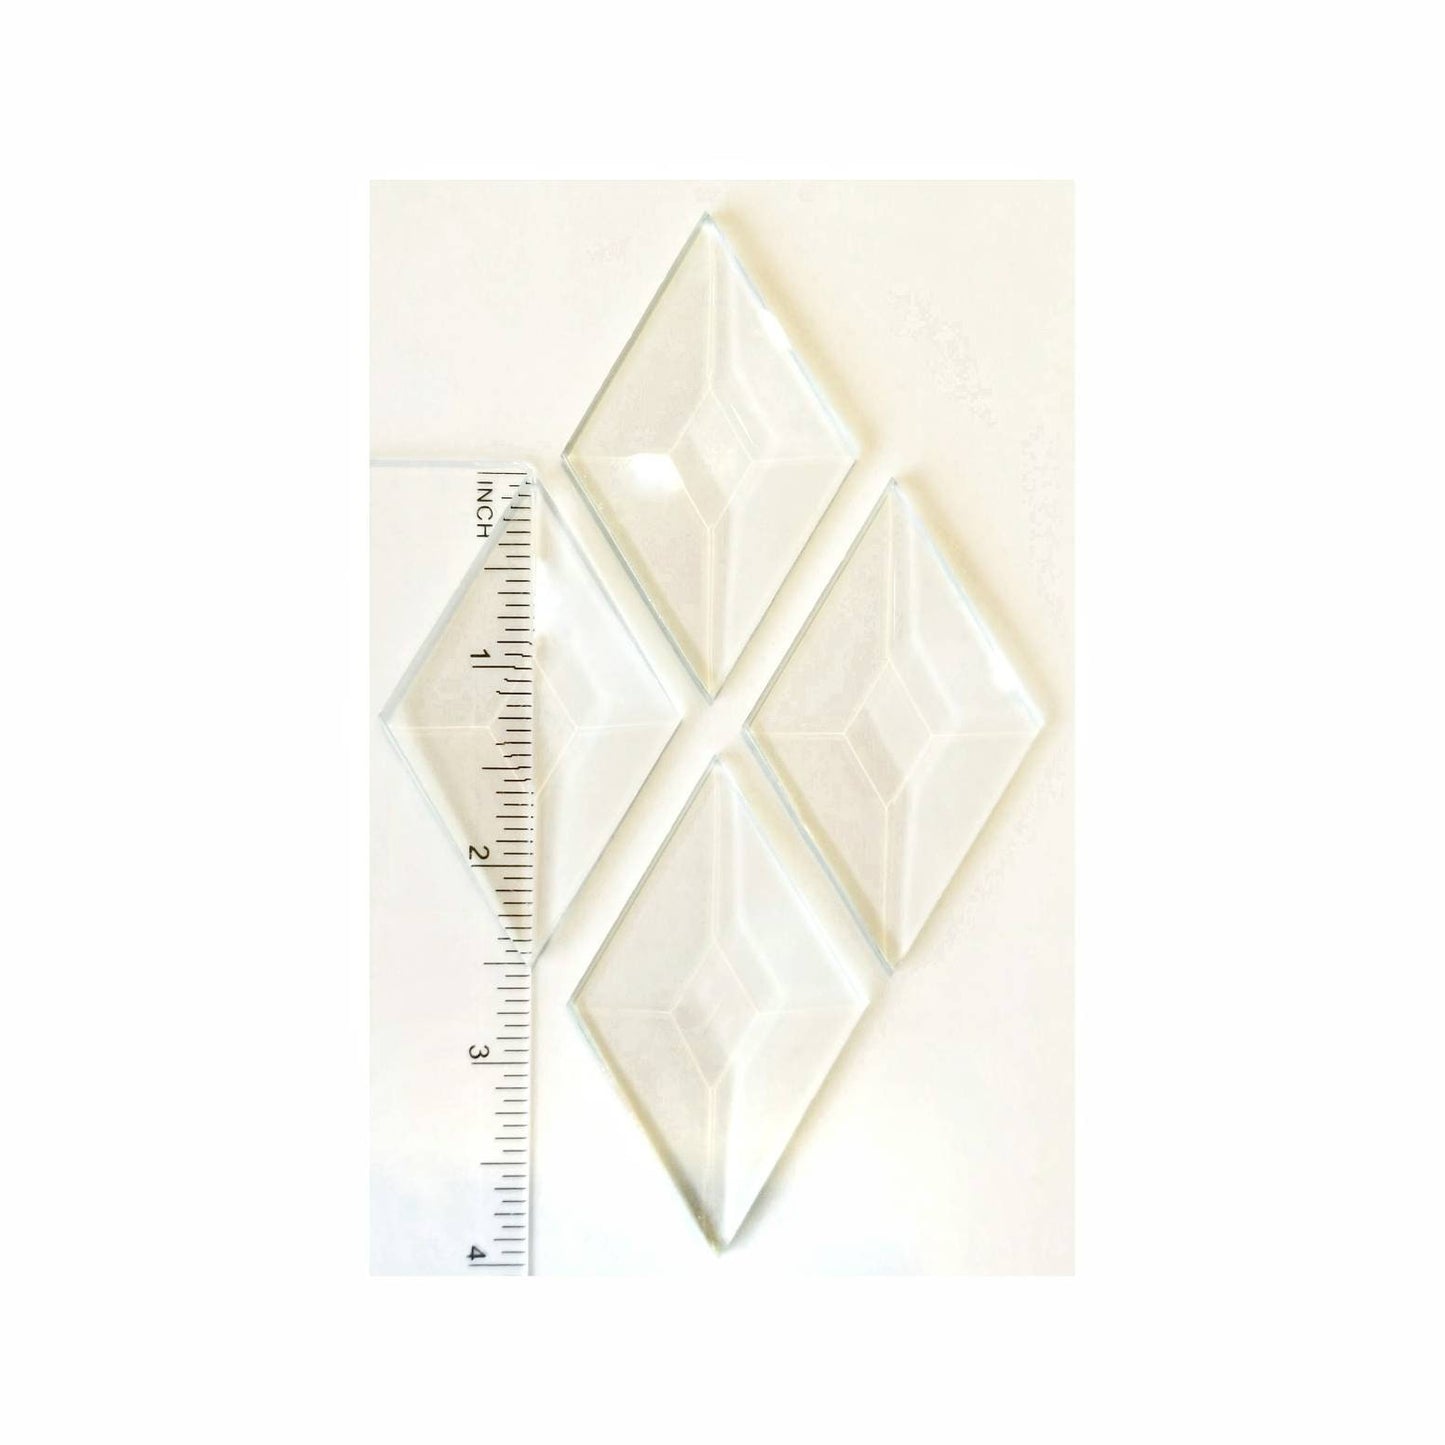 Stained Glass Bevels, Diamond Shaped. 1.5"× 2.5". Clear Prism Polished, Angled Edges. Sets of 4 or 8, listed in variations.